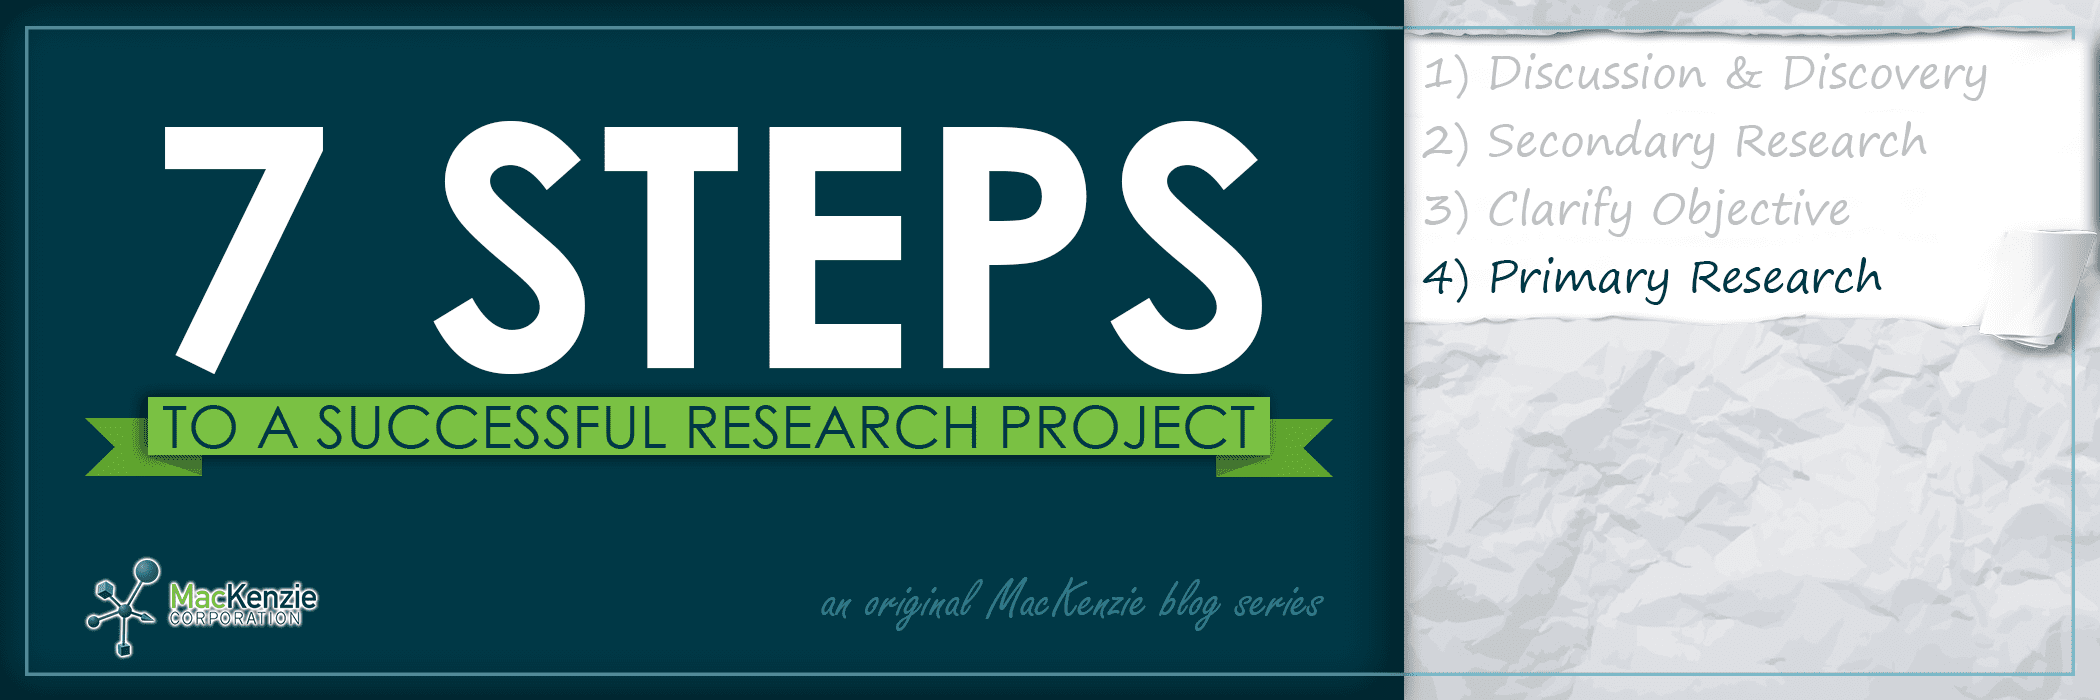 A Successful Research Project – Step 4: Primary Research